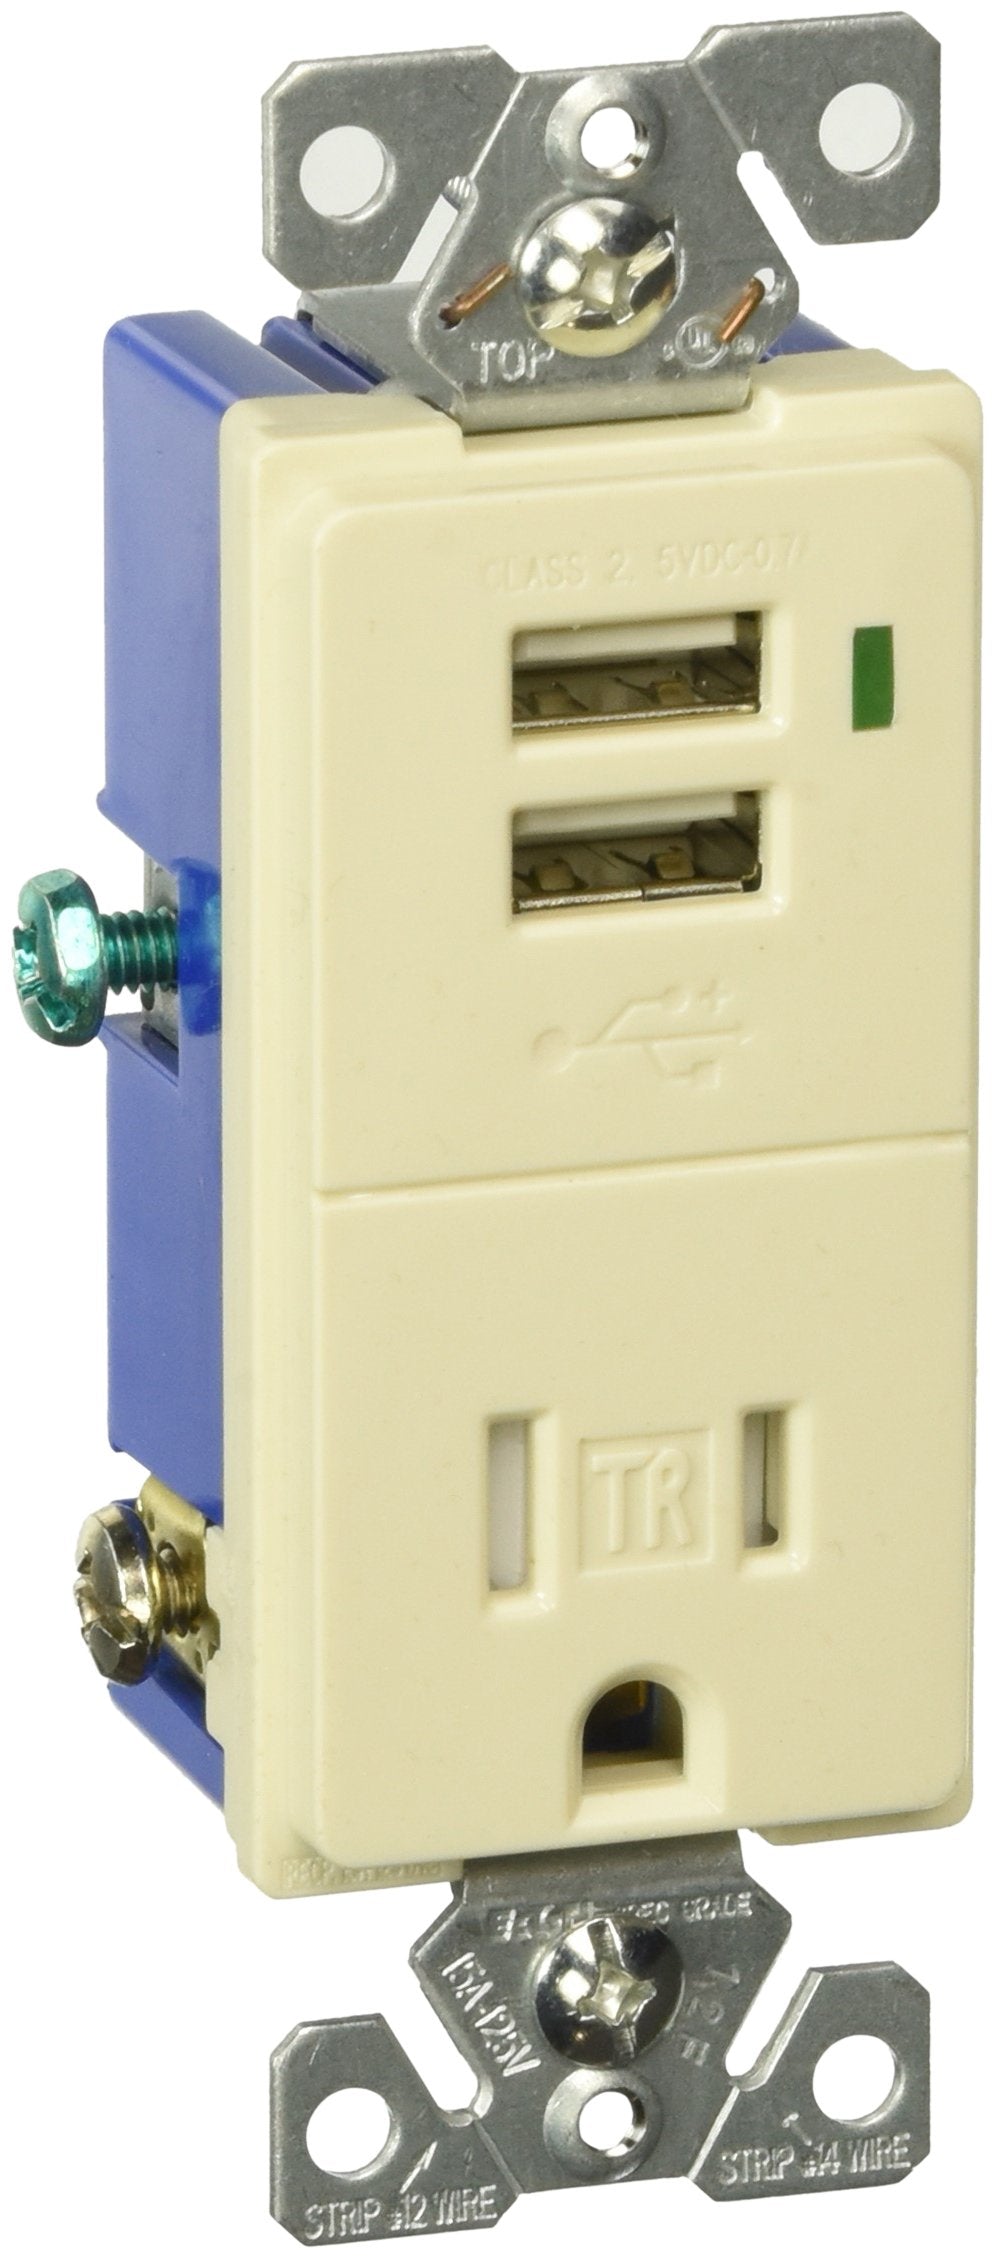 EATON TR7740LA-BOX Combination USB Charger with Tamper Resistant 15A 125V Receptacle, Light Almond